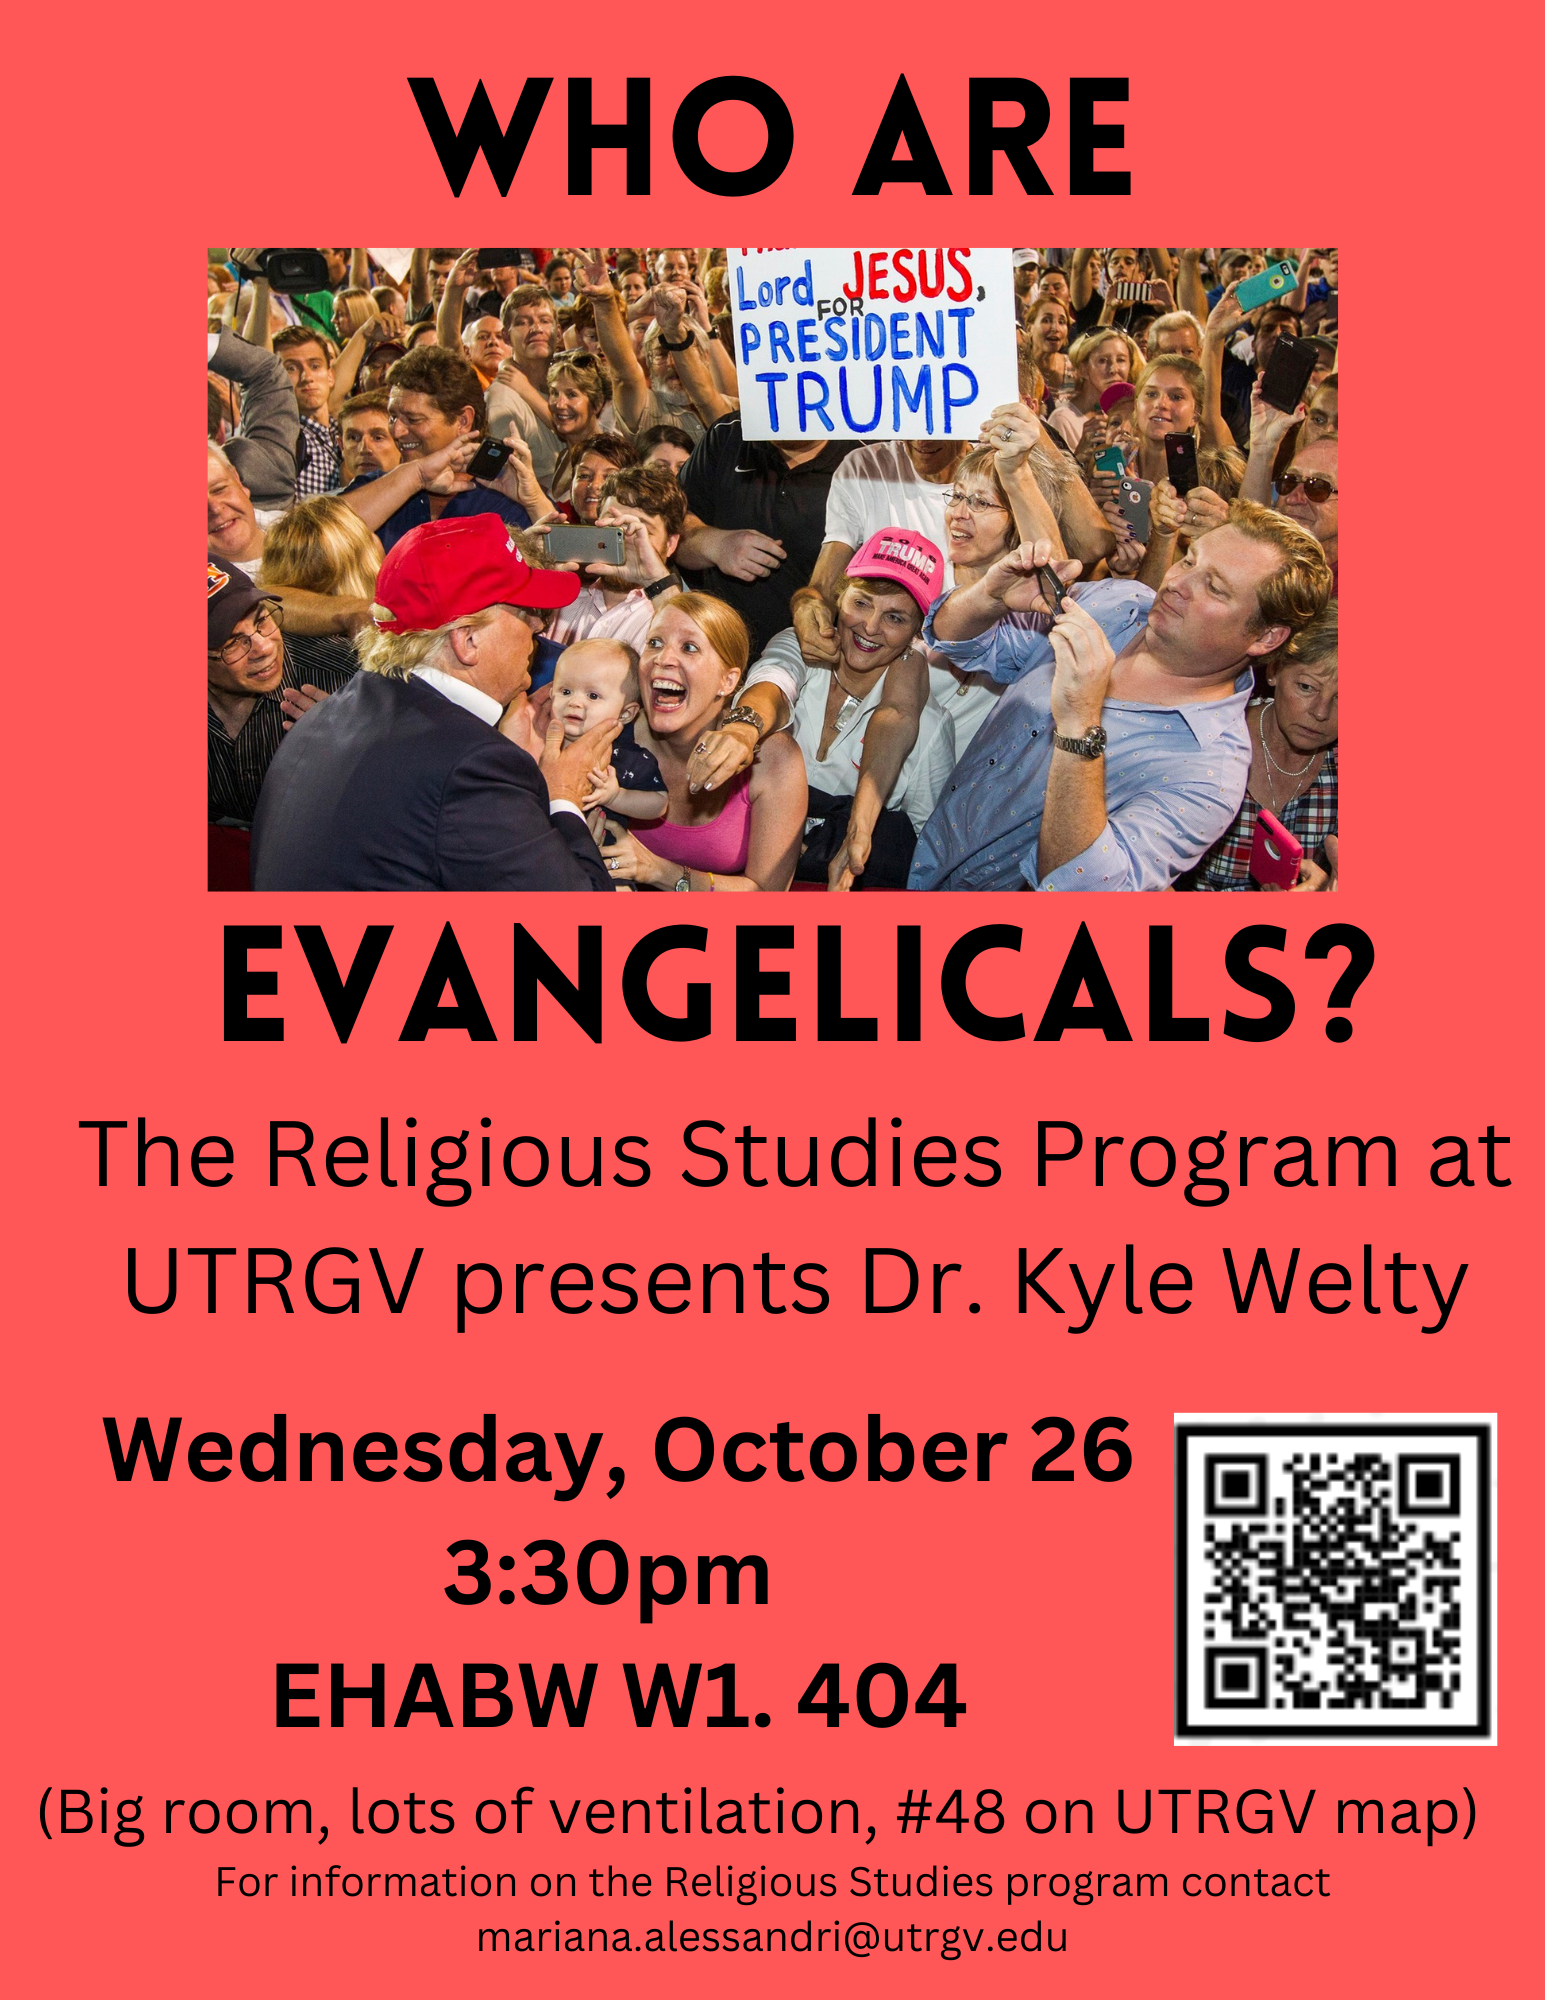 The Religious Studies Program at UTRGV presents Dr. Kyle Welty, who will give a free hybrid talk titled "Who Are Evangelicals?"